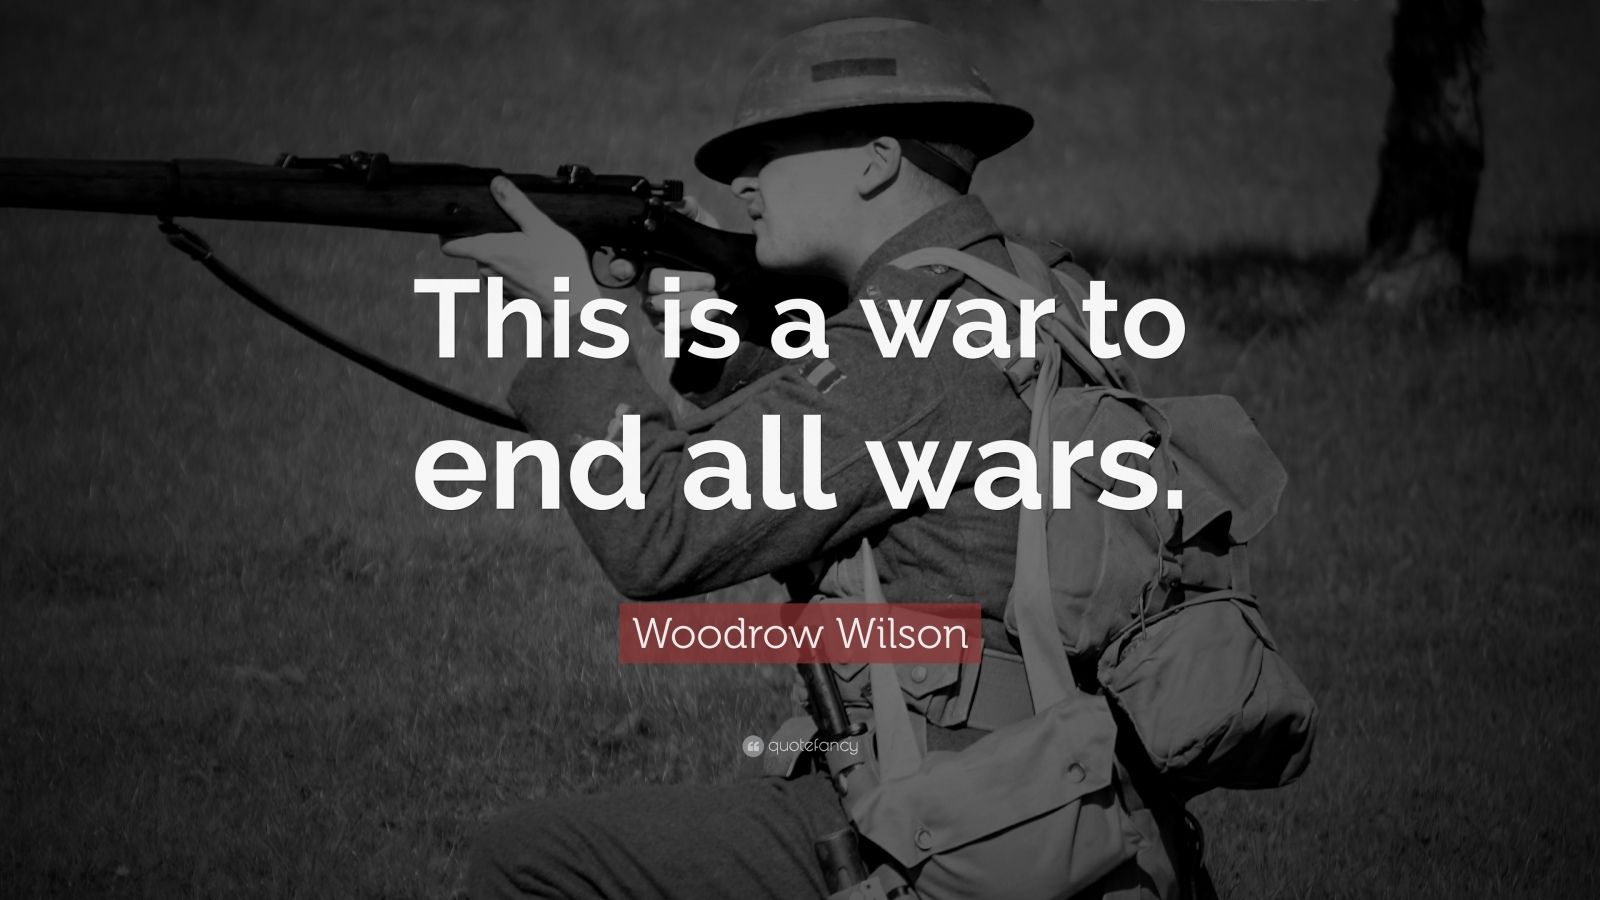 Woodrow Wilson Quote: “This is a war to end all wars.”